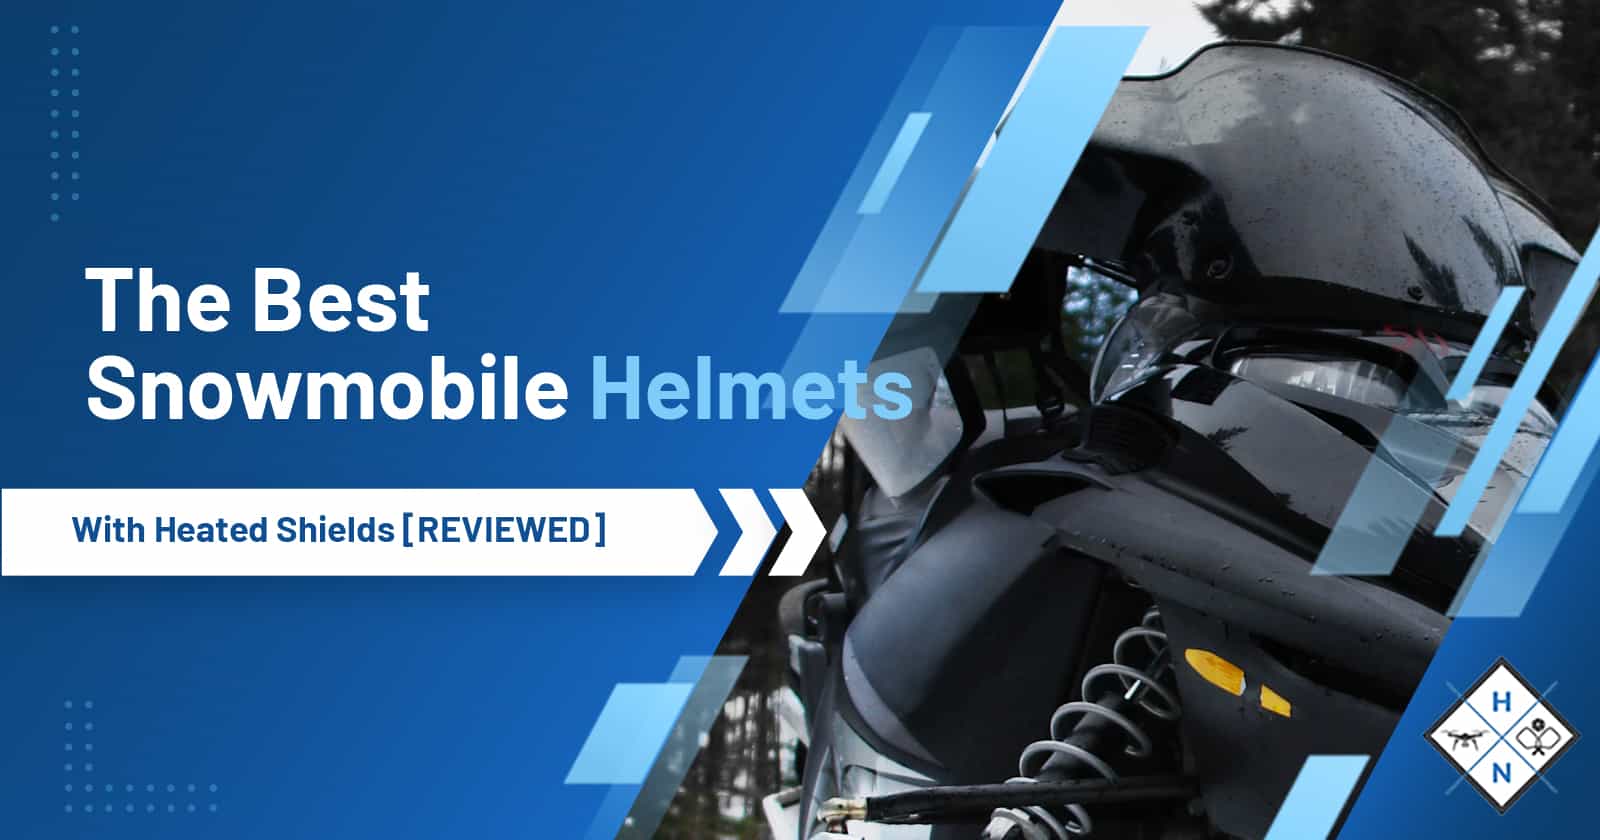 The Best Snowmobile Helmets With Heated Shields [REVIEWED]